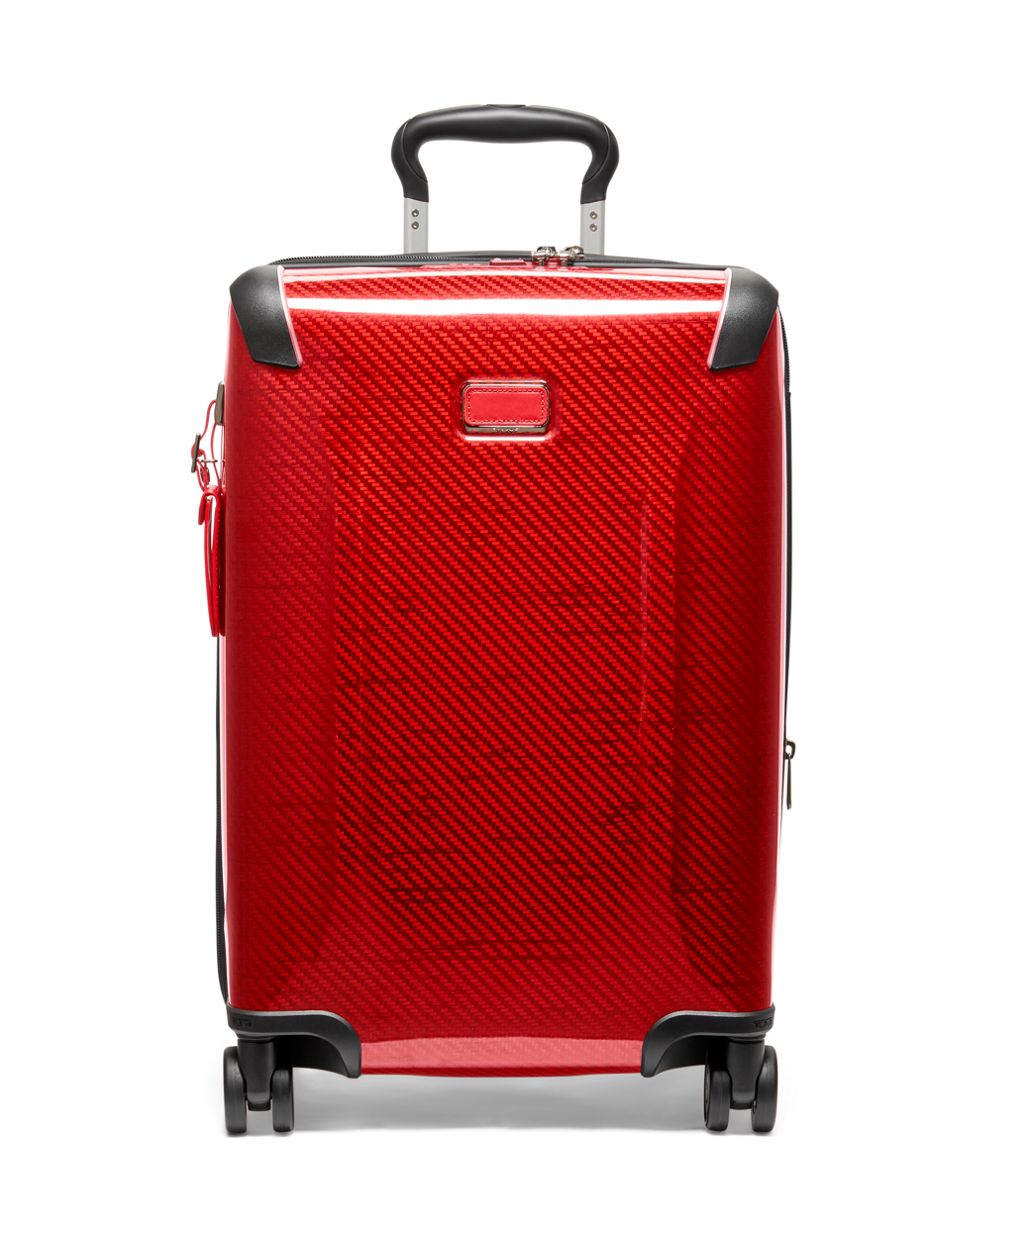 19 Degree International Expandable Carry-On 55 cm